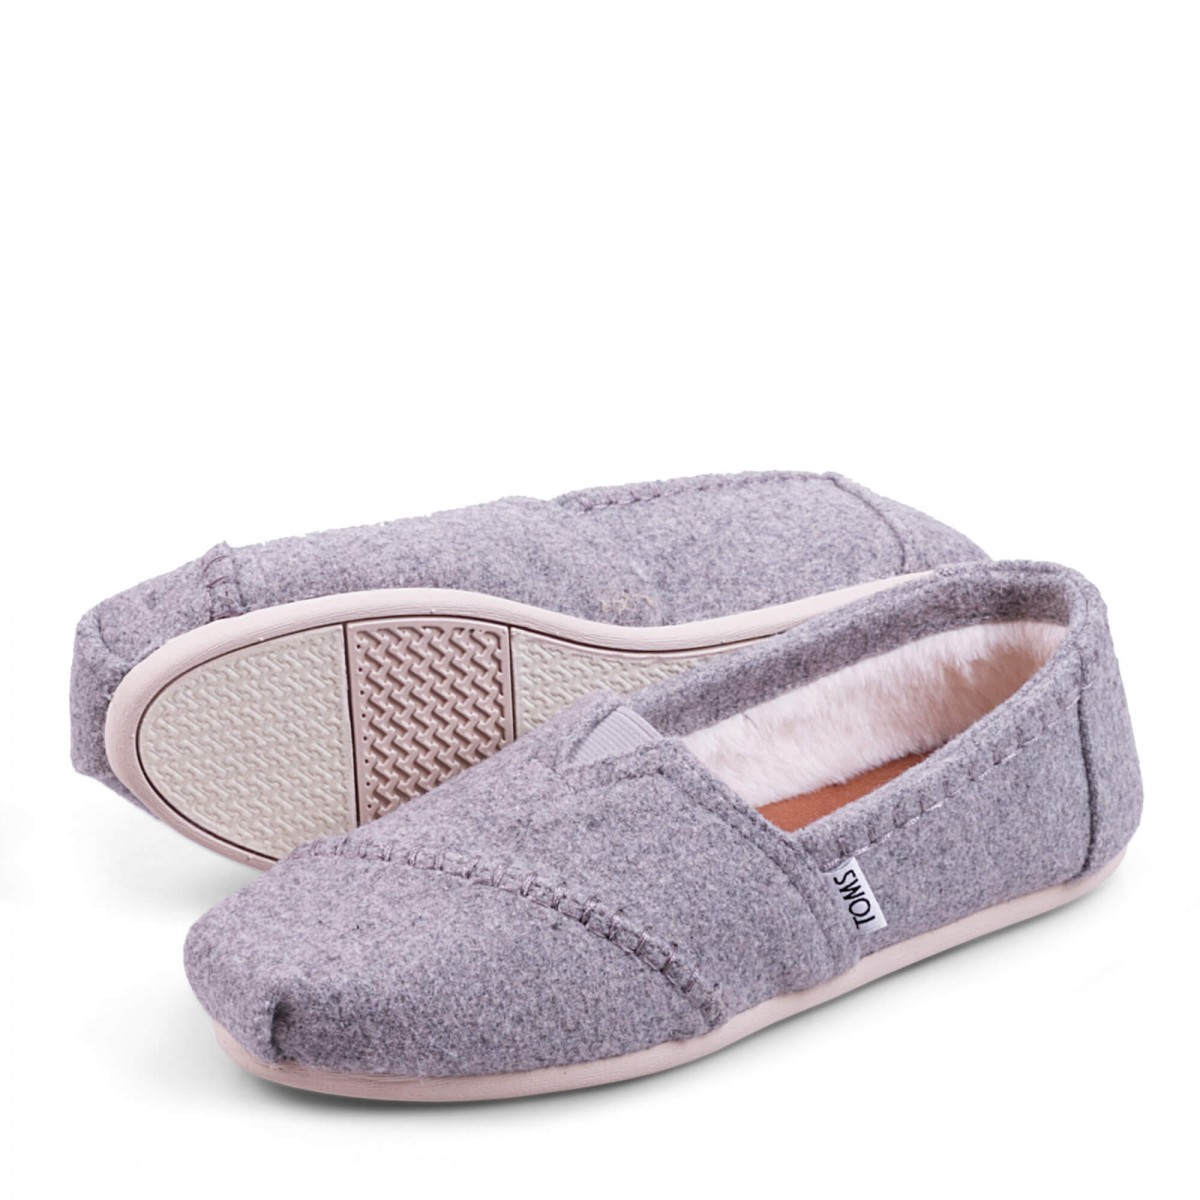 CLASSIC DRIZZLE GREY WOOL